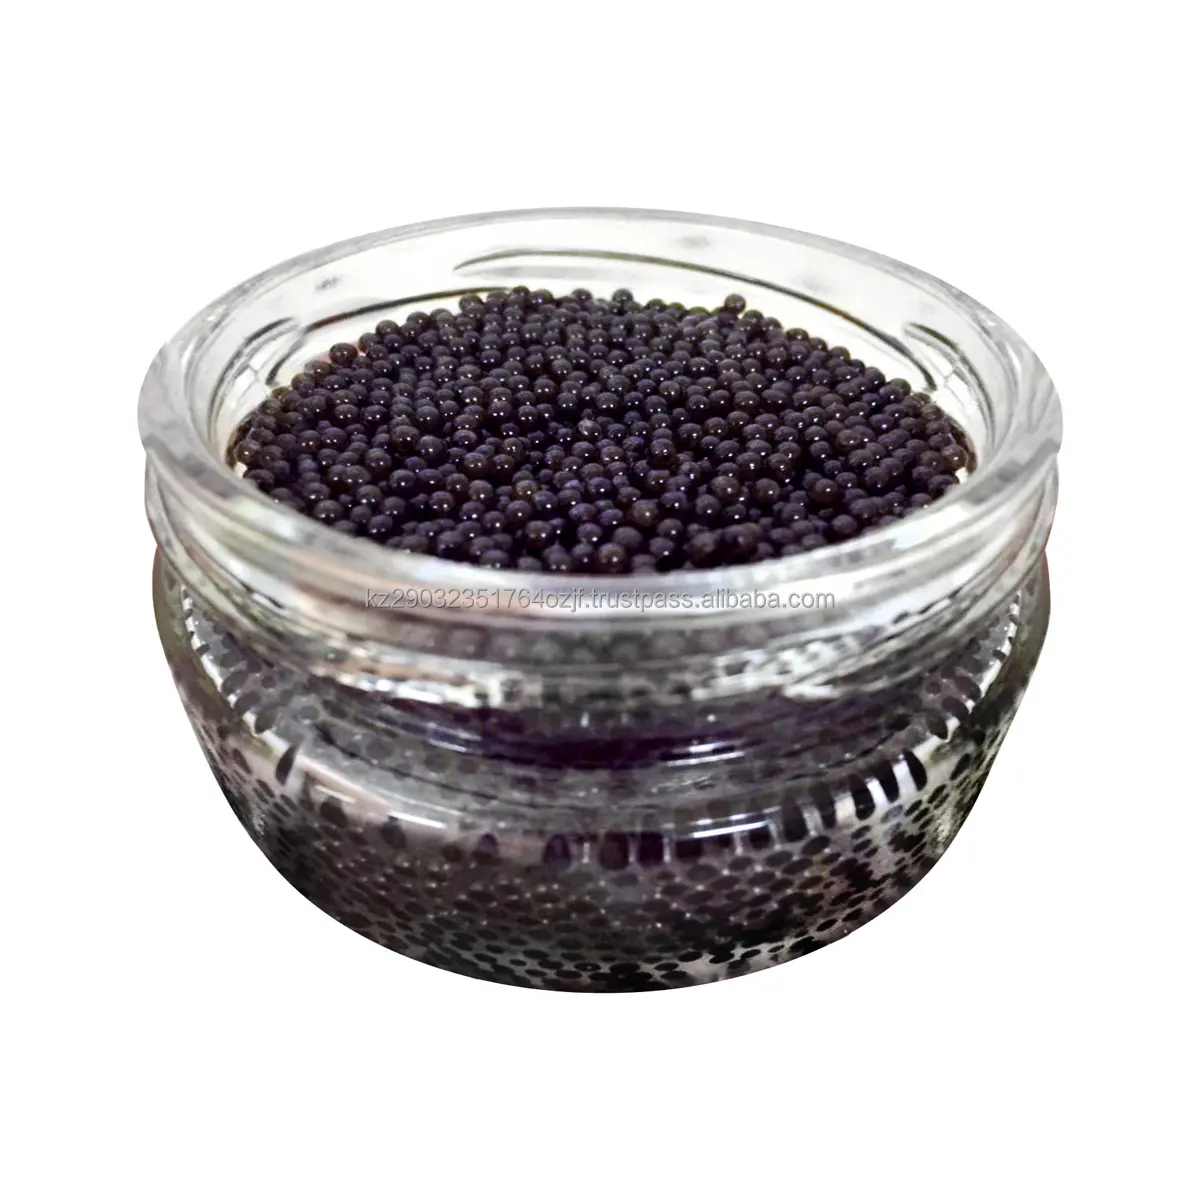 Pasteurized farmed sterlet caviare pre-packed in glass jar from fishfarm